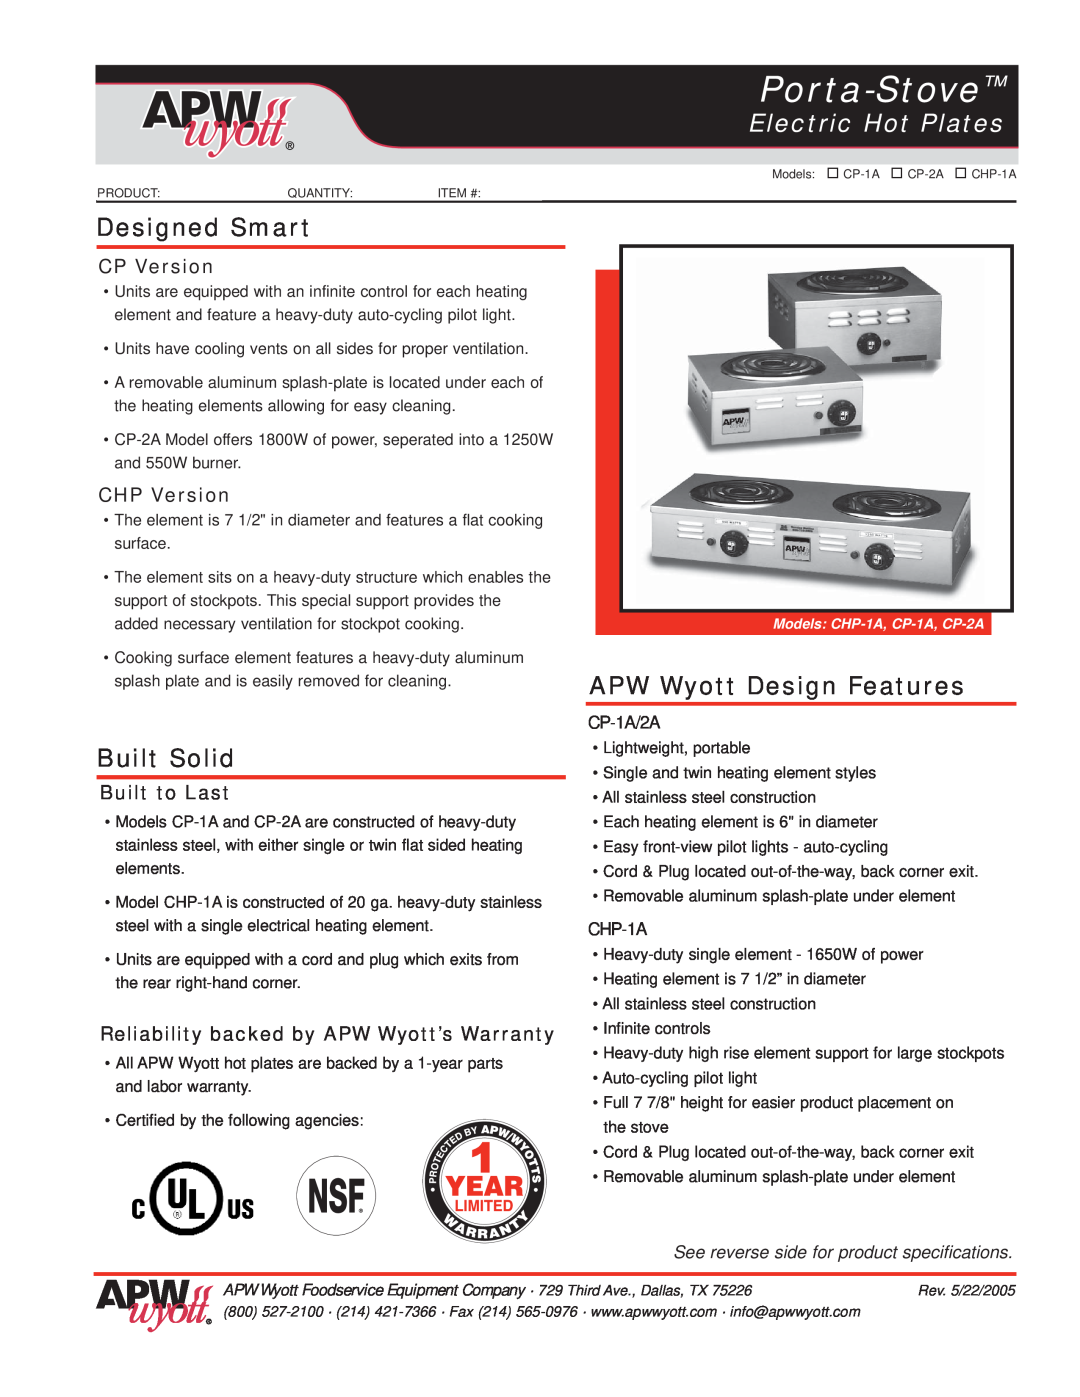 APW Wyott CP-1A warranty Porta-Stove, Electric Hot Plates, Designed Smart, Built Solid, APW Wyott Design Features, CHP-1A 